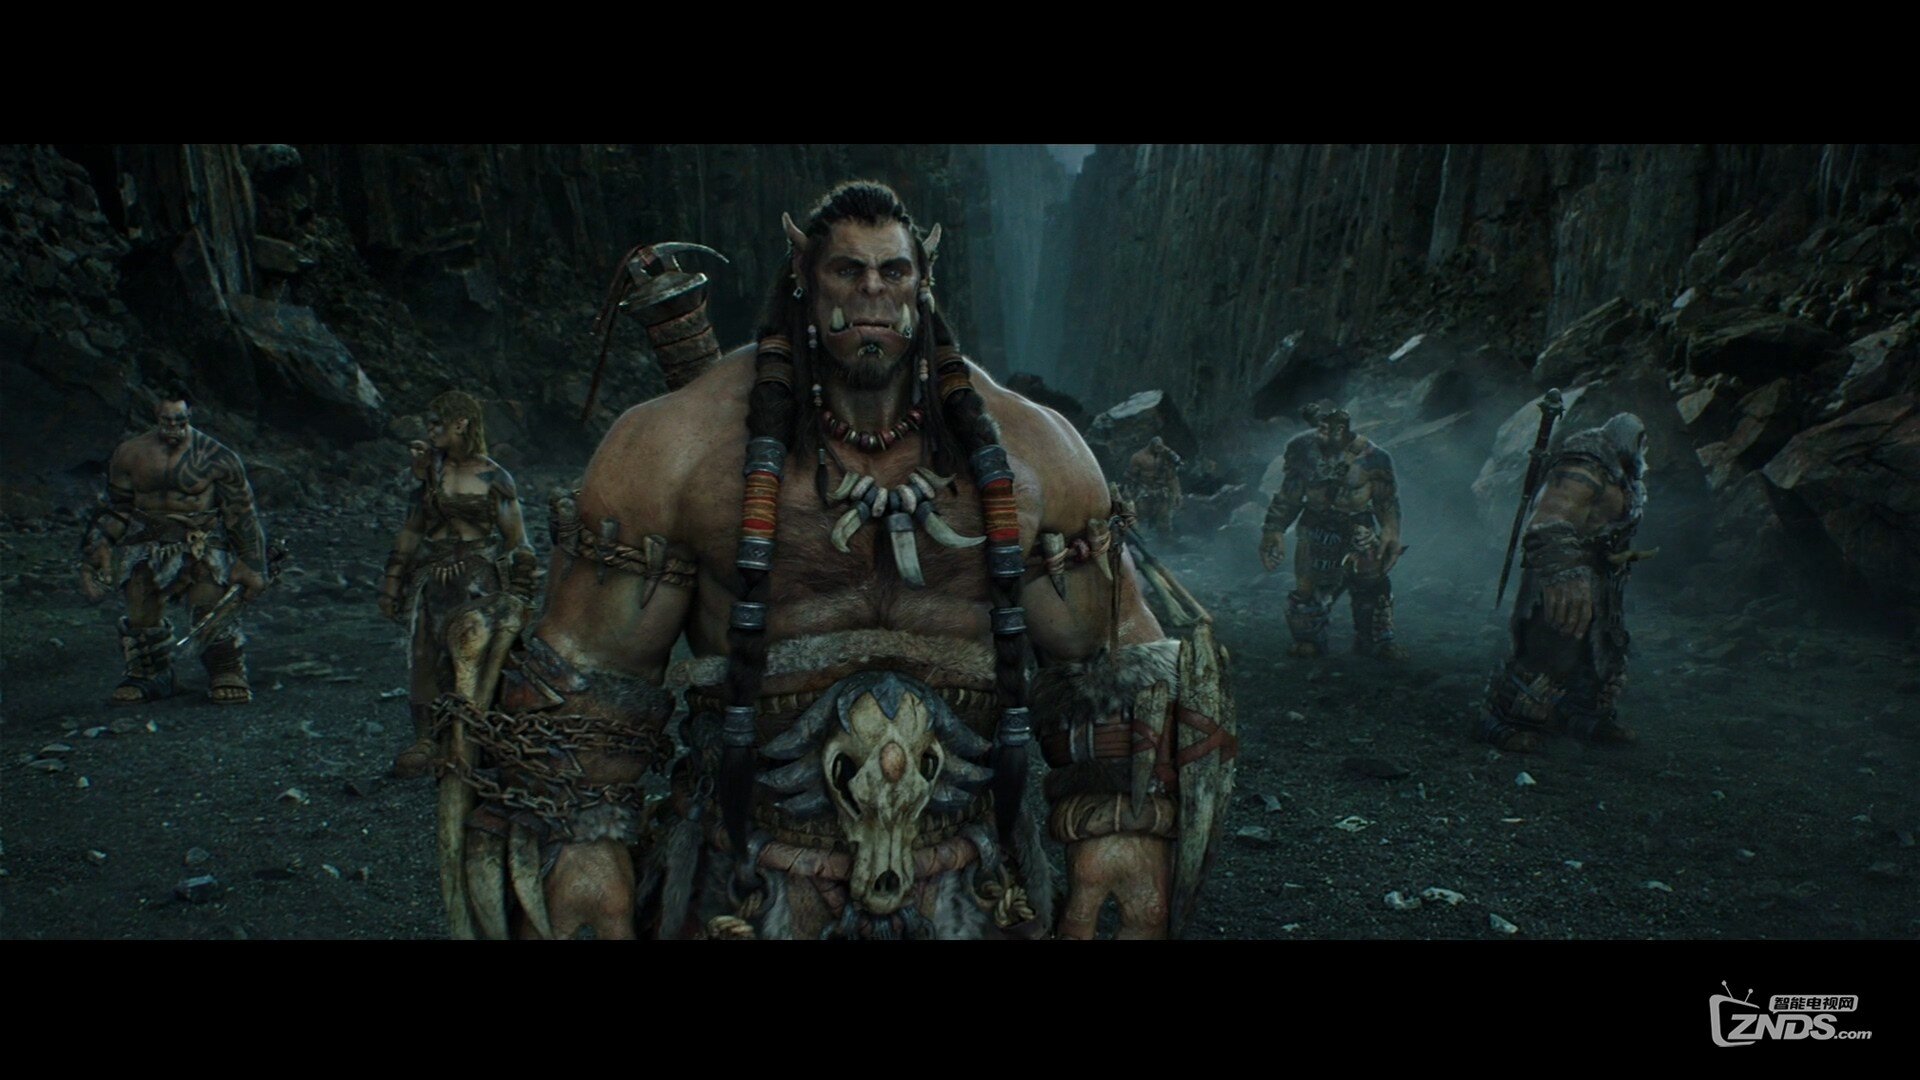 Warcraft_Trailer1_Texted_Stereo_PCM_1080p.mov_20160214_211601.671.jpg